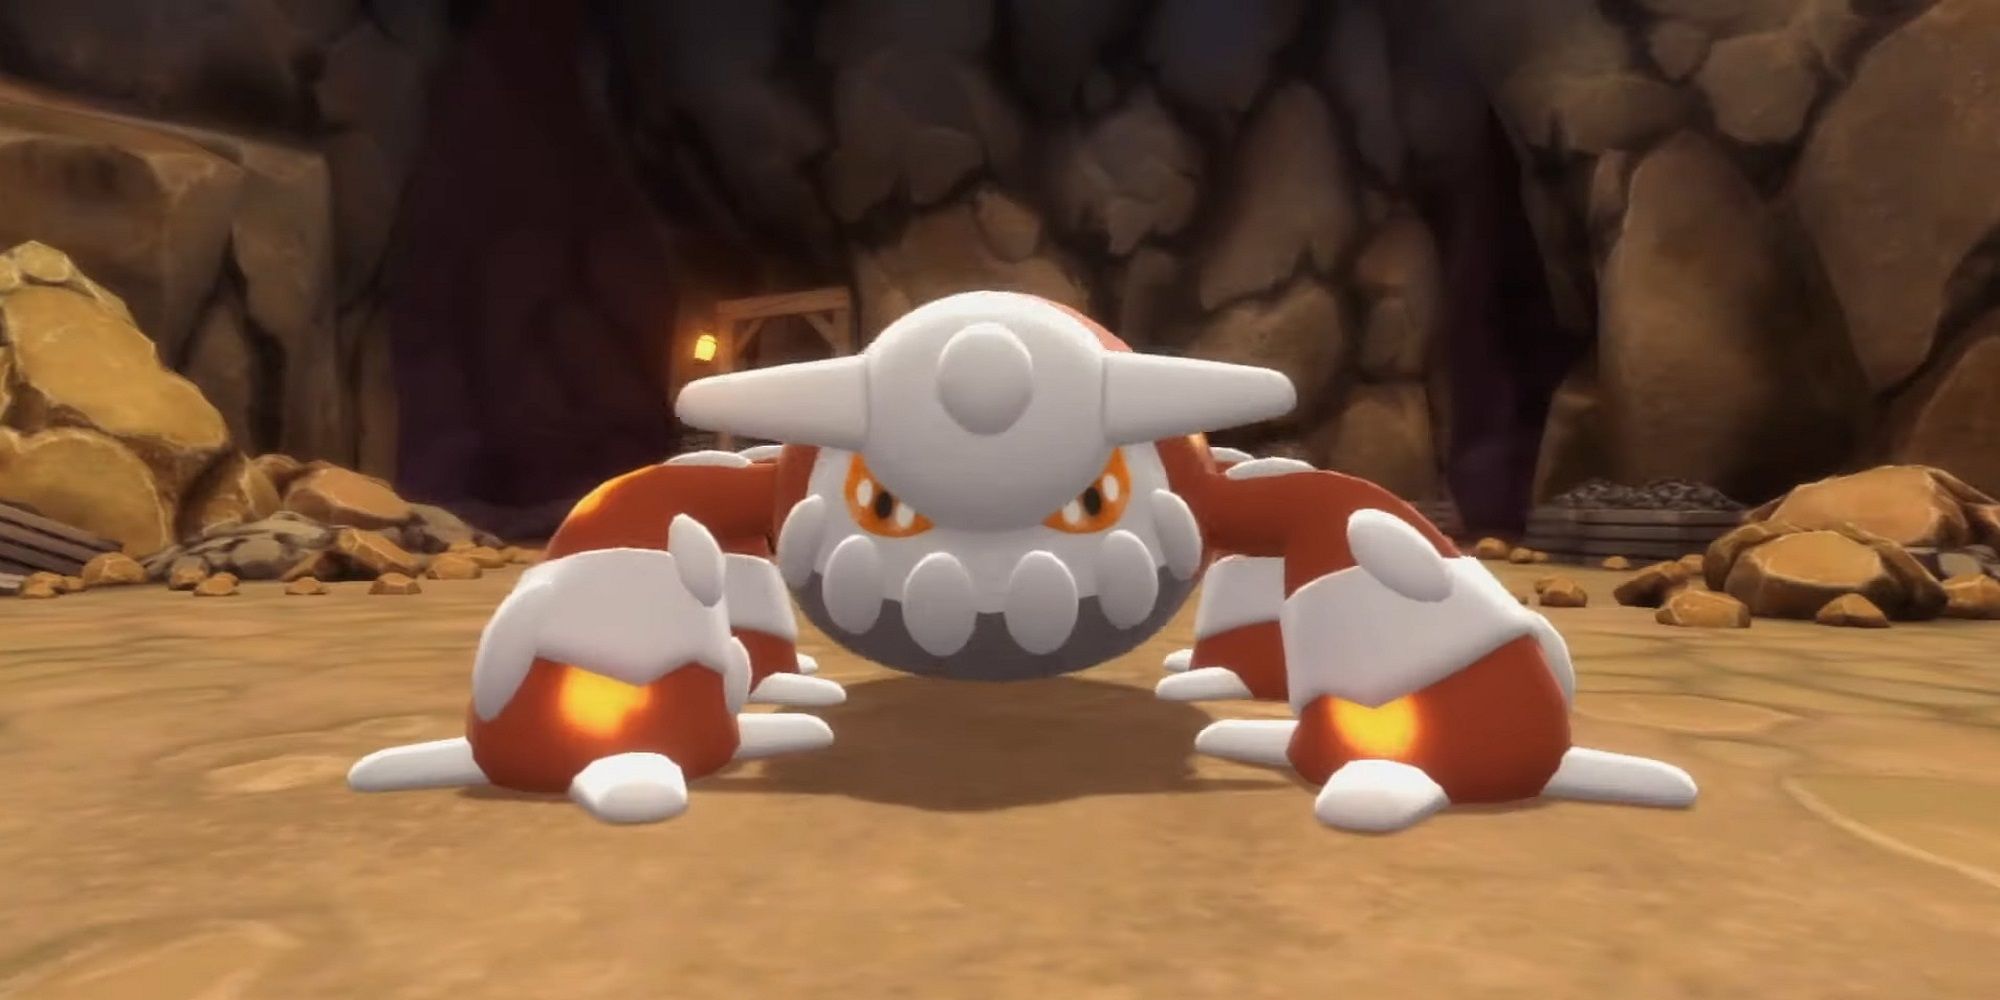 Heatran glaring angrily in a cave.